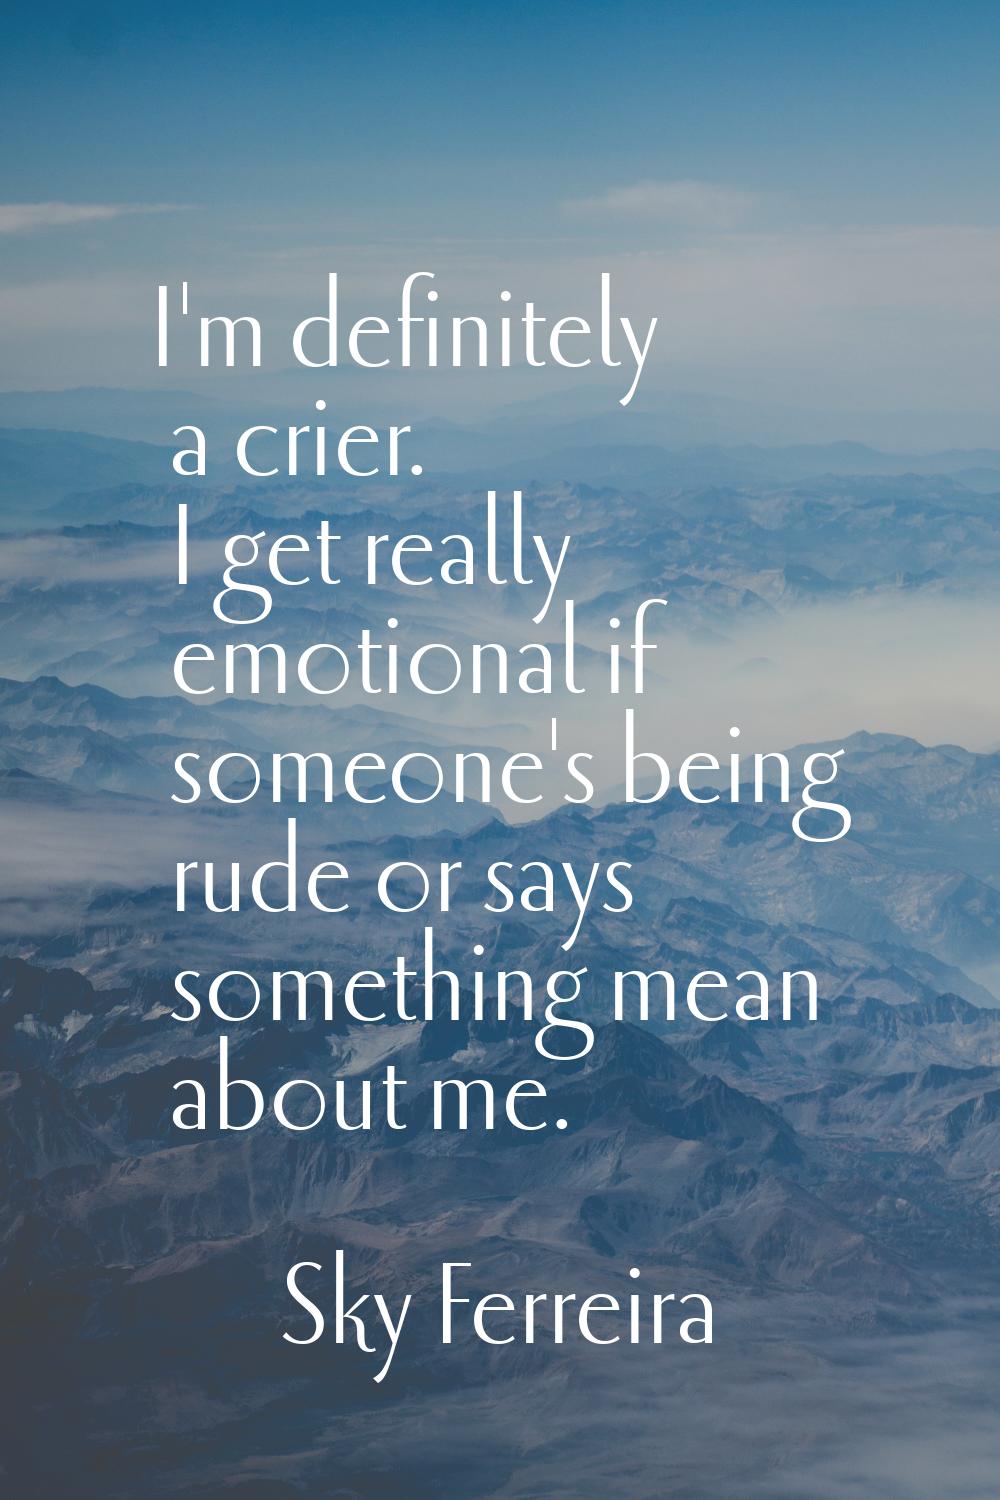 I'm definitely a crier. I get really emotional if someone's being rude or says something mean about